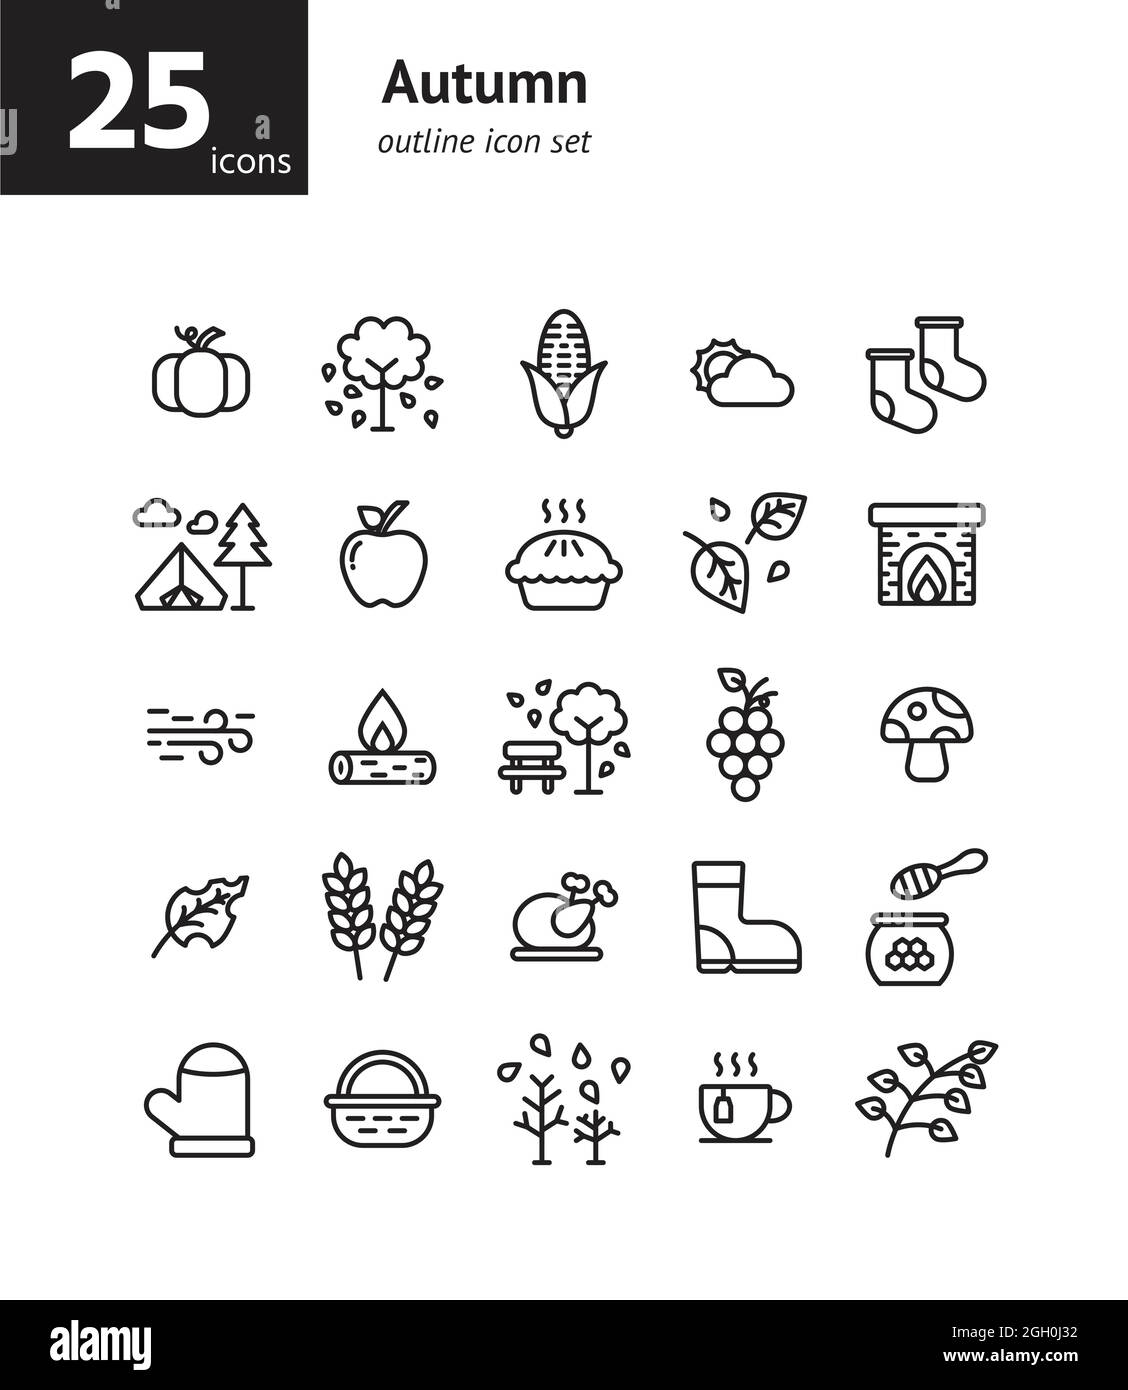 Autumn outline icon set. Vector and Illustration. Stock Vector